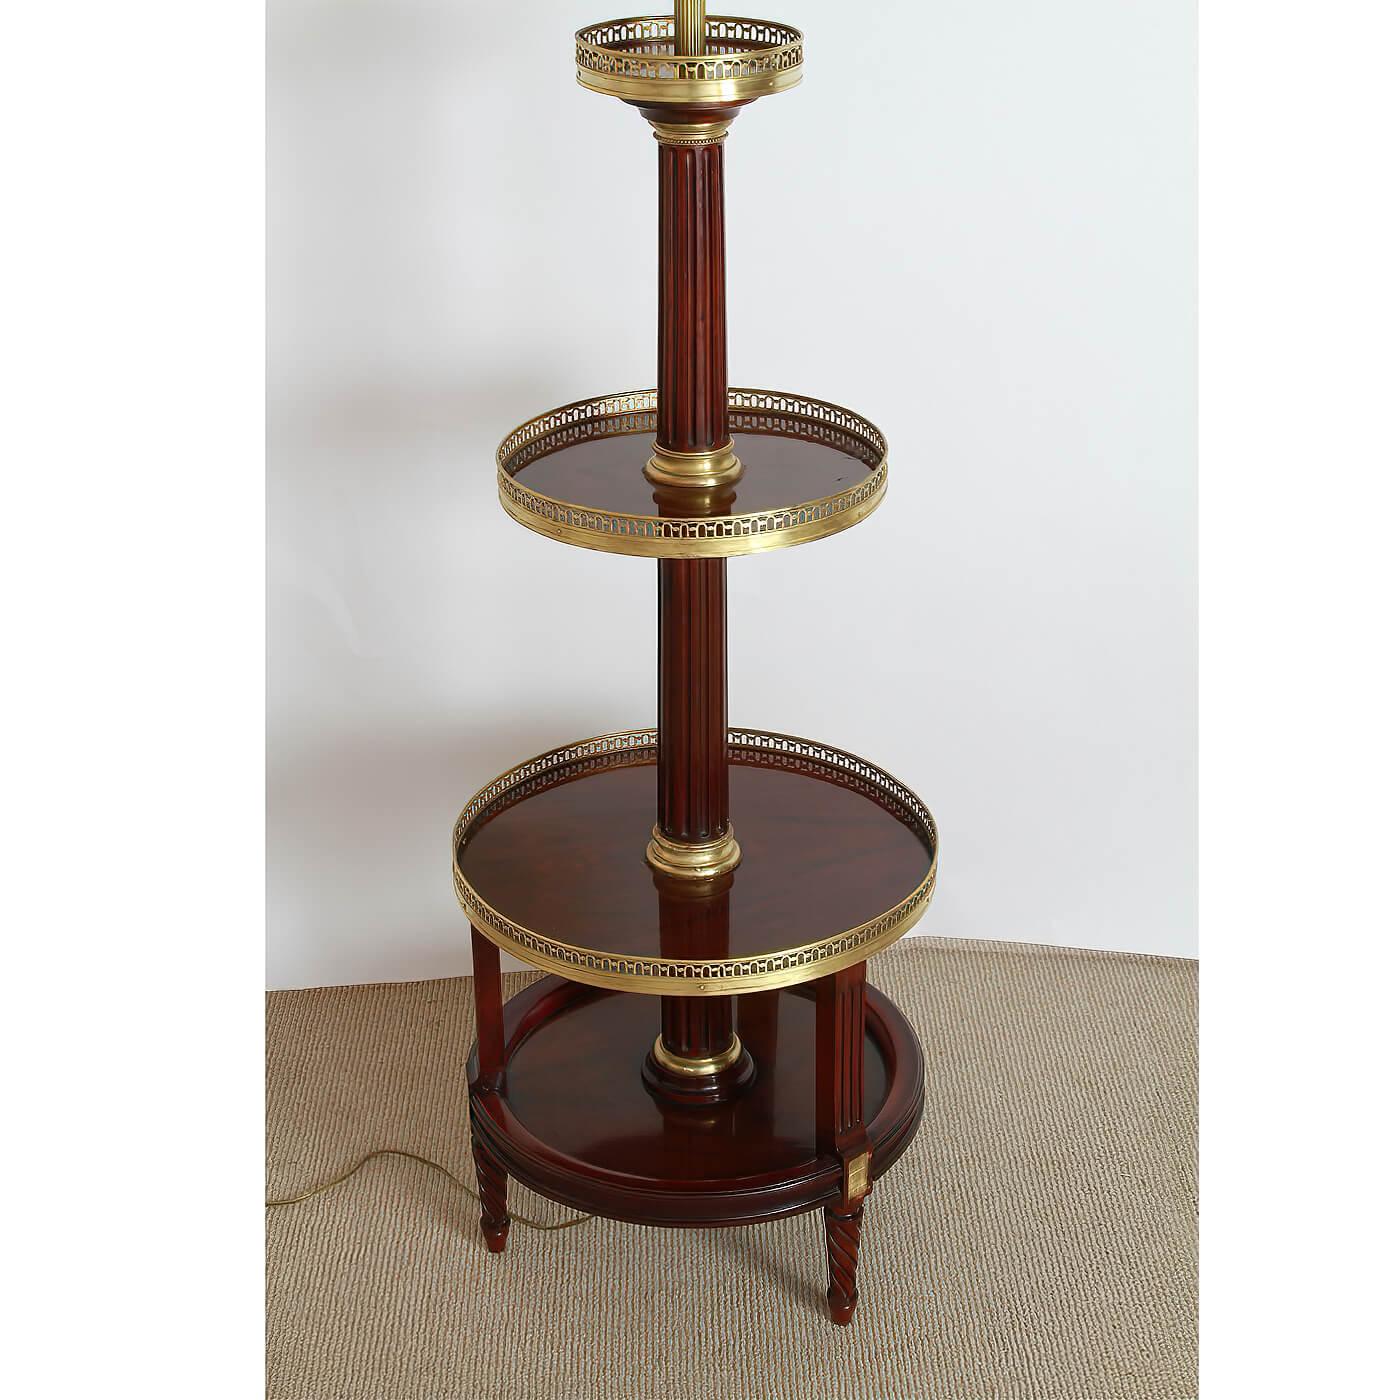 A French Louis XVI style mahogany four-tier floor lamp with circular tapering form, pierced bronze galleries, fluted supports and turned and fluted legs. France, ca 1940

Dimensions: 20